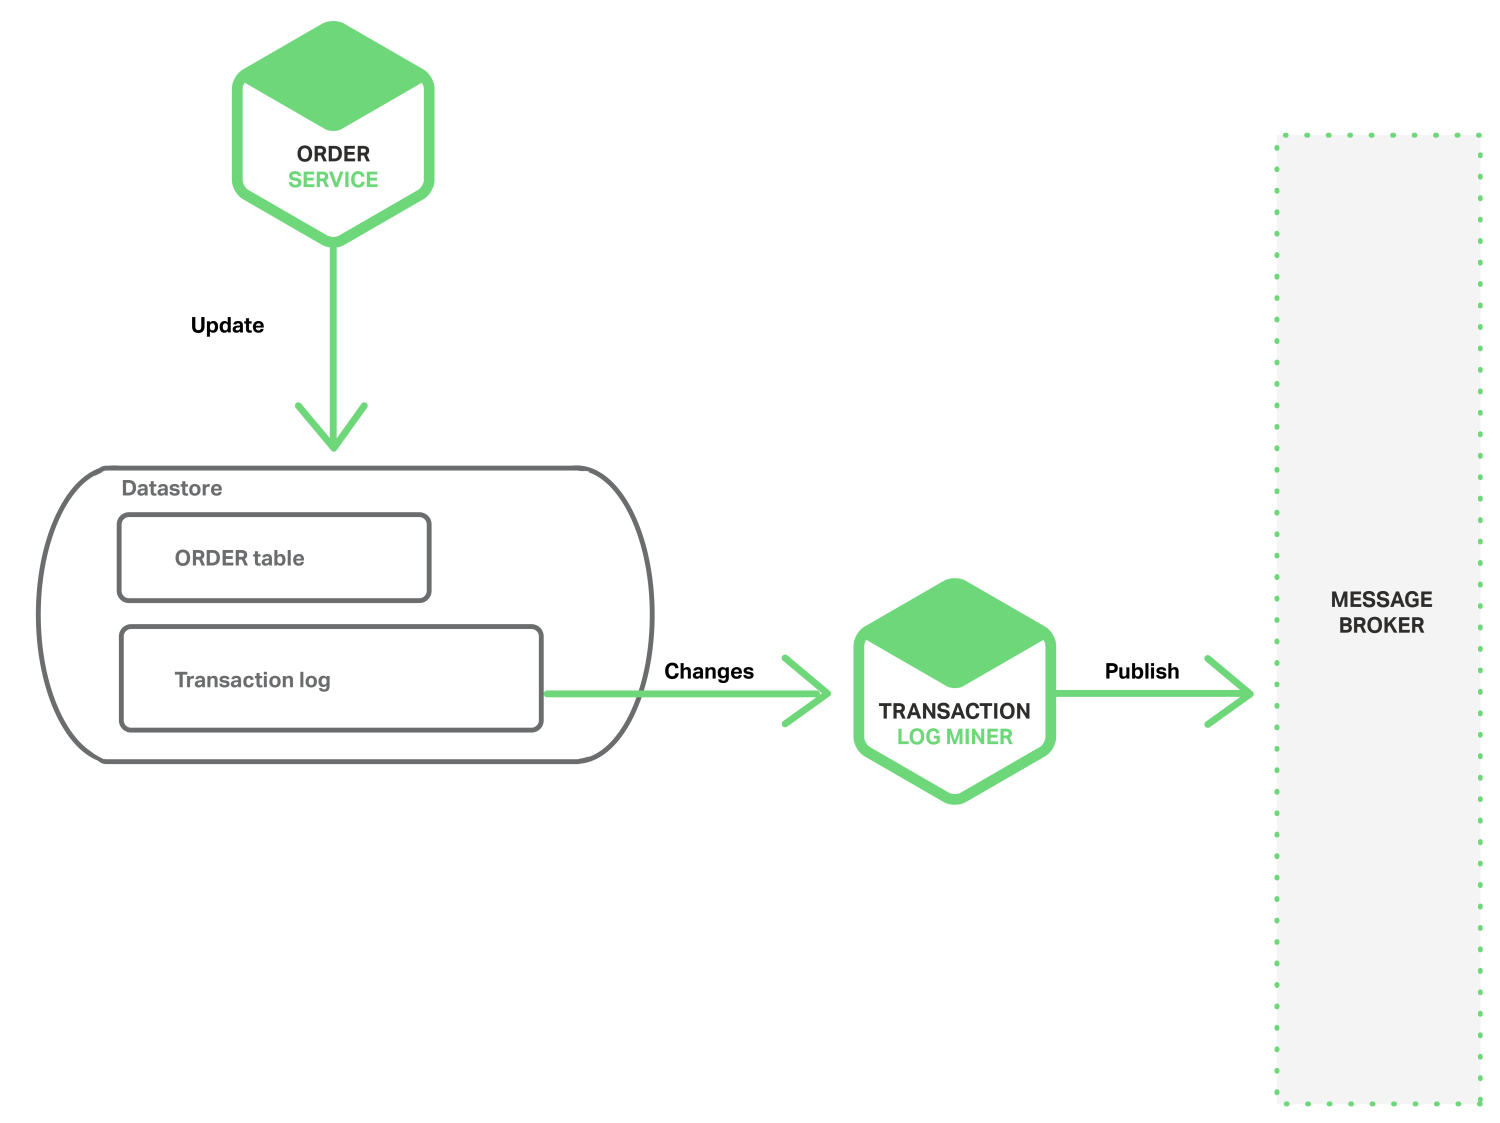 In a microservices architecture, achieve atomicity by mining the transaction log for events